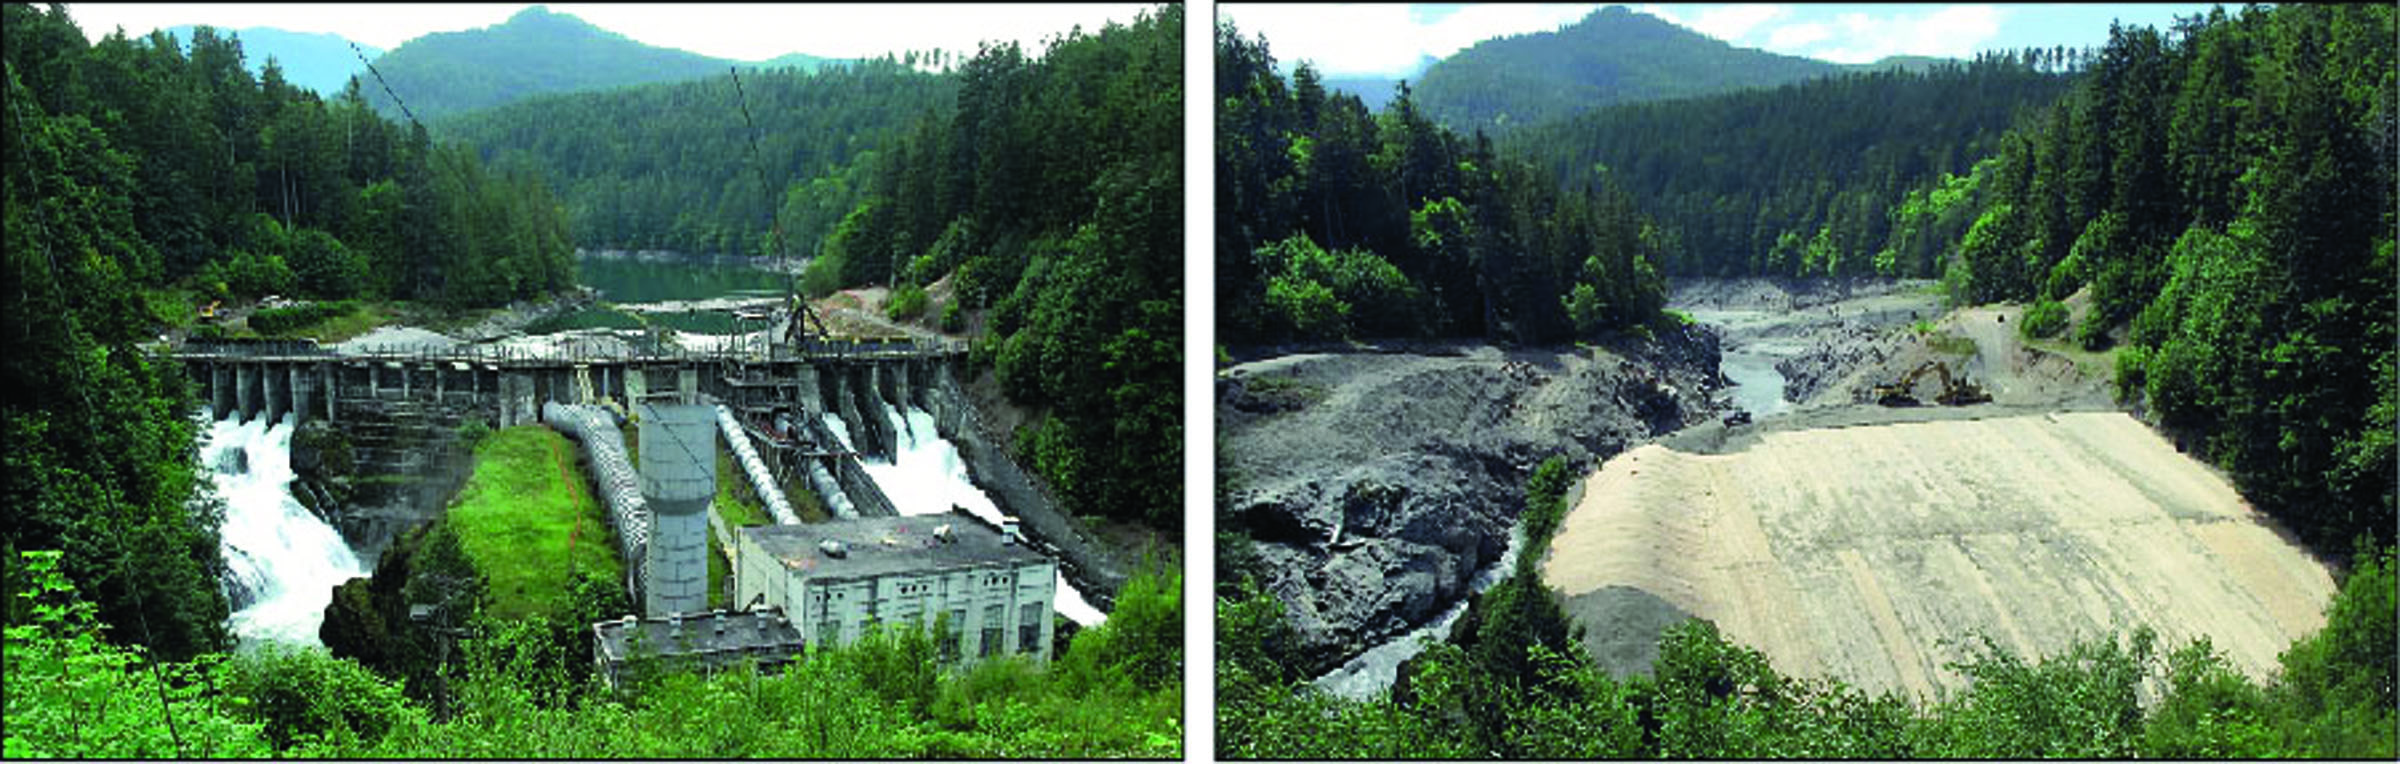 In these images from the National Park Service webcam aimed at the site of the Elwha Dam